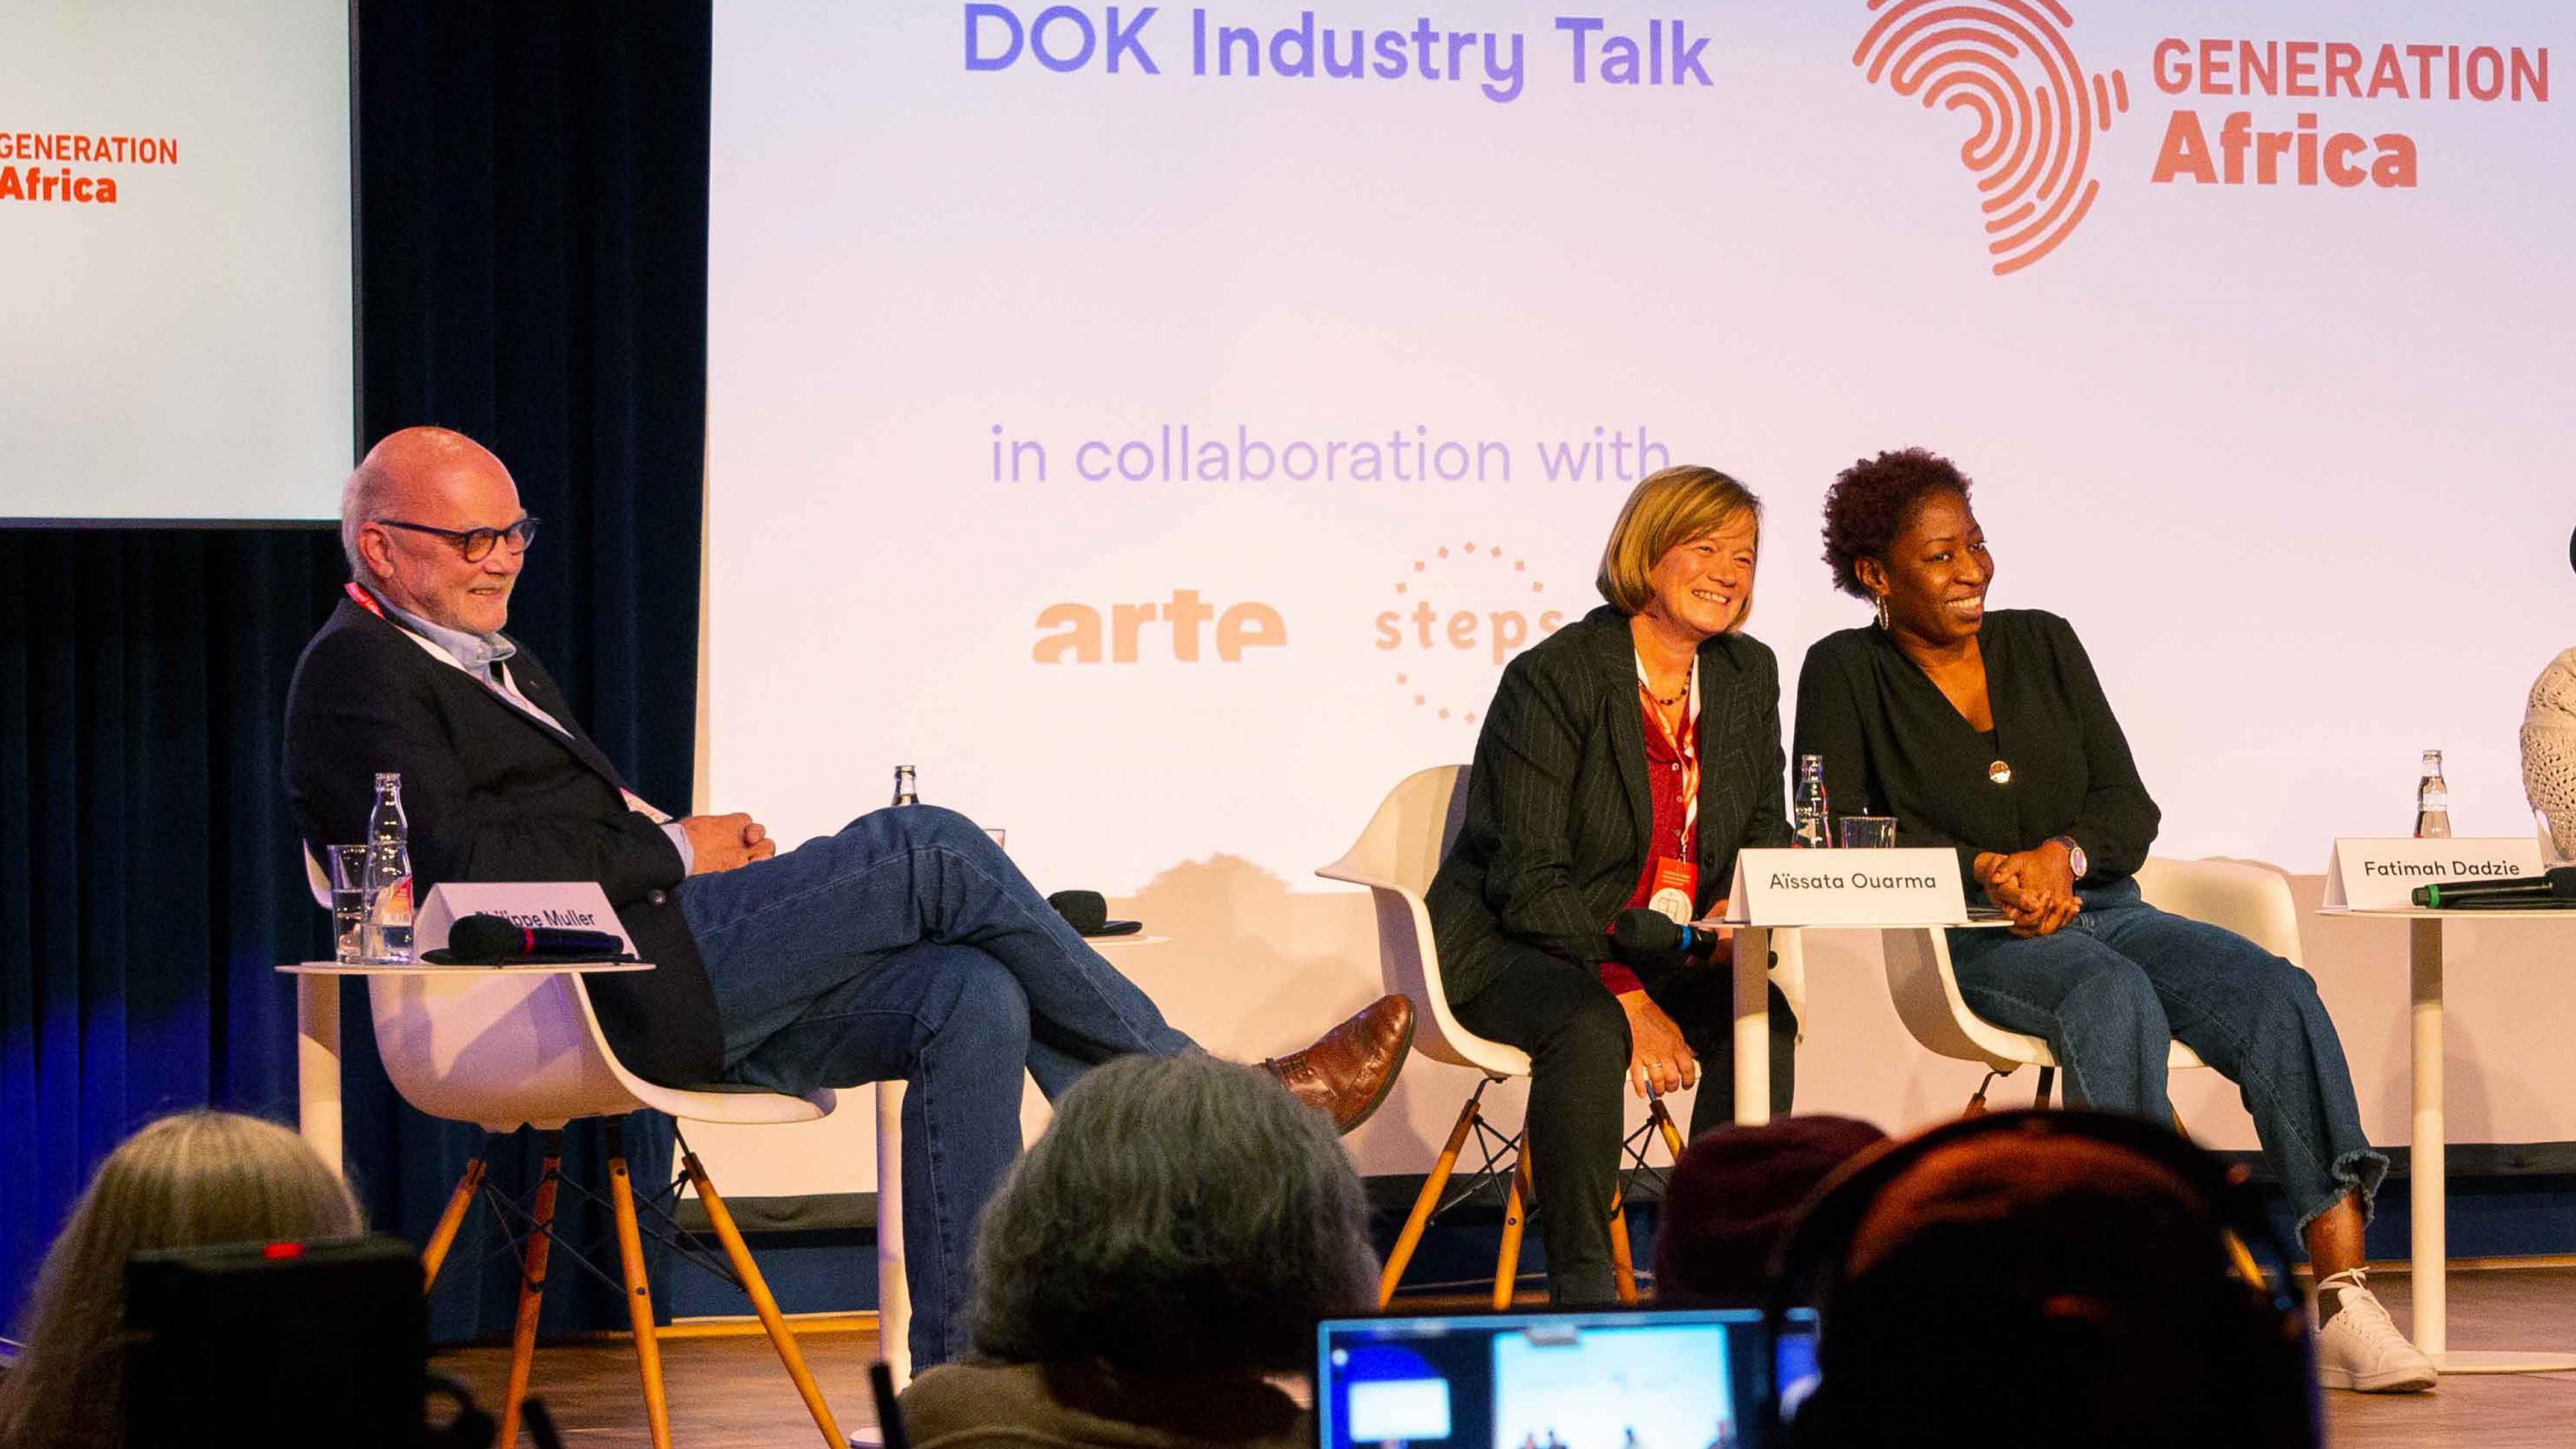 Three persons on stage of a panel, all of them laughing and looking to the audience. FLTR: A man in blue jeans, a woman with blond hair who is wearing a black suit, and a black woman with short hair. In the background a big screen with information on the event: DOK Industry Talk, below the logos of arte and steps.